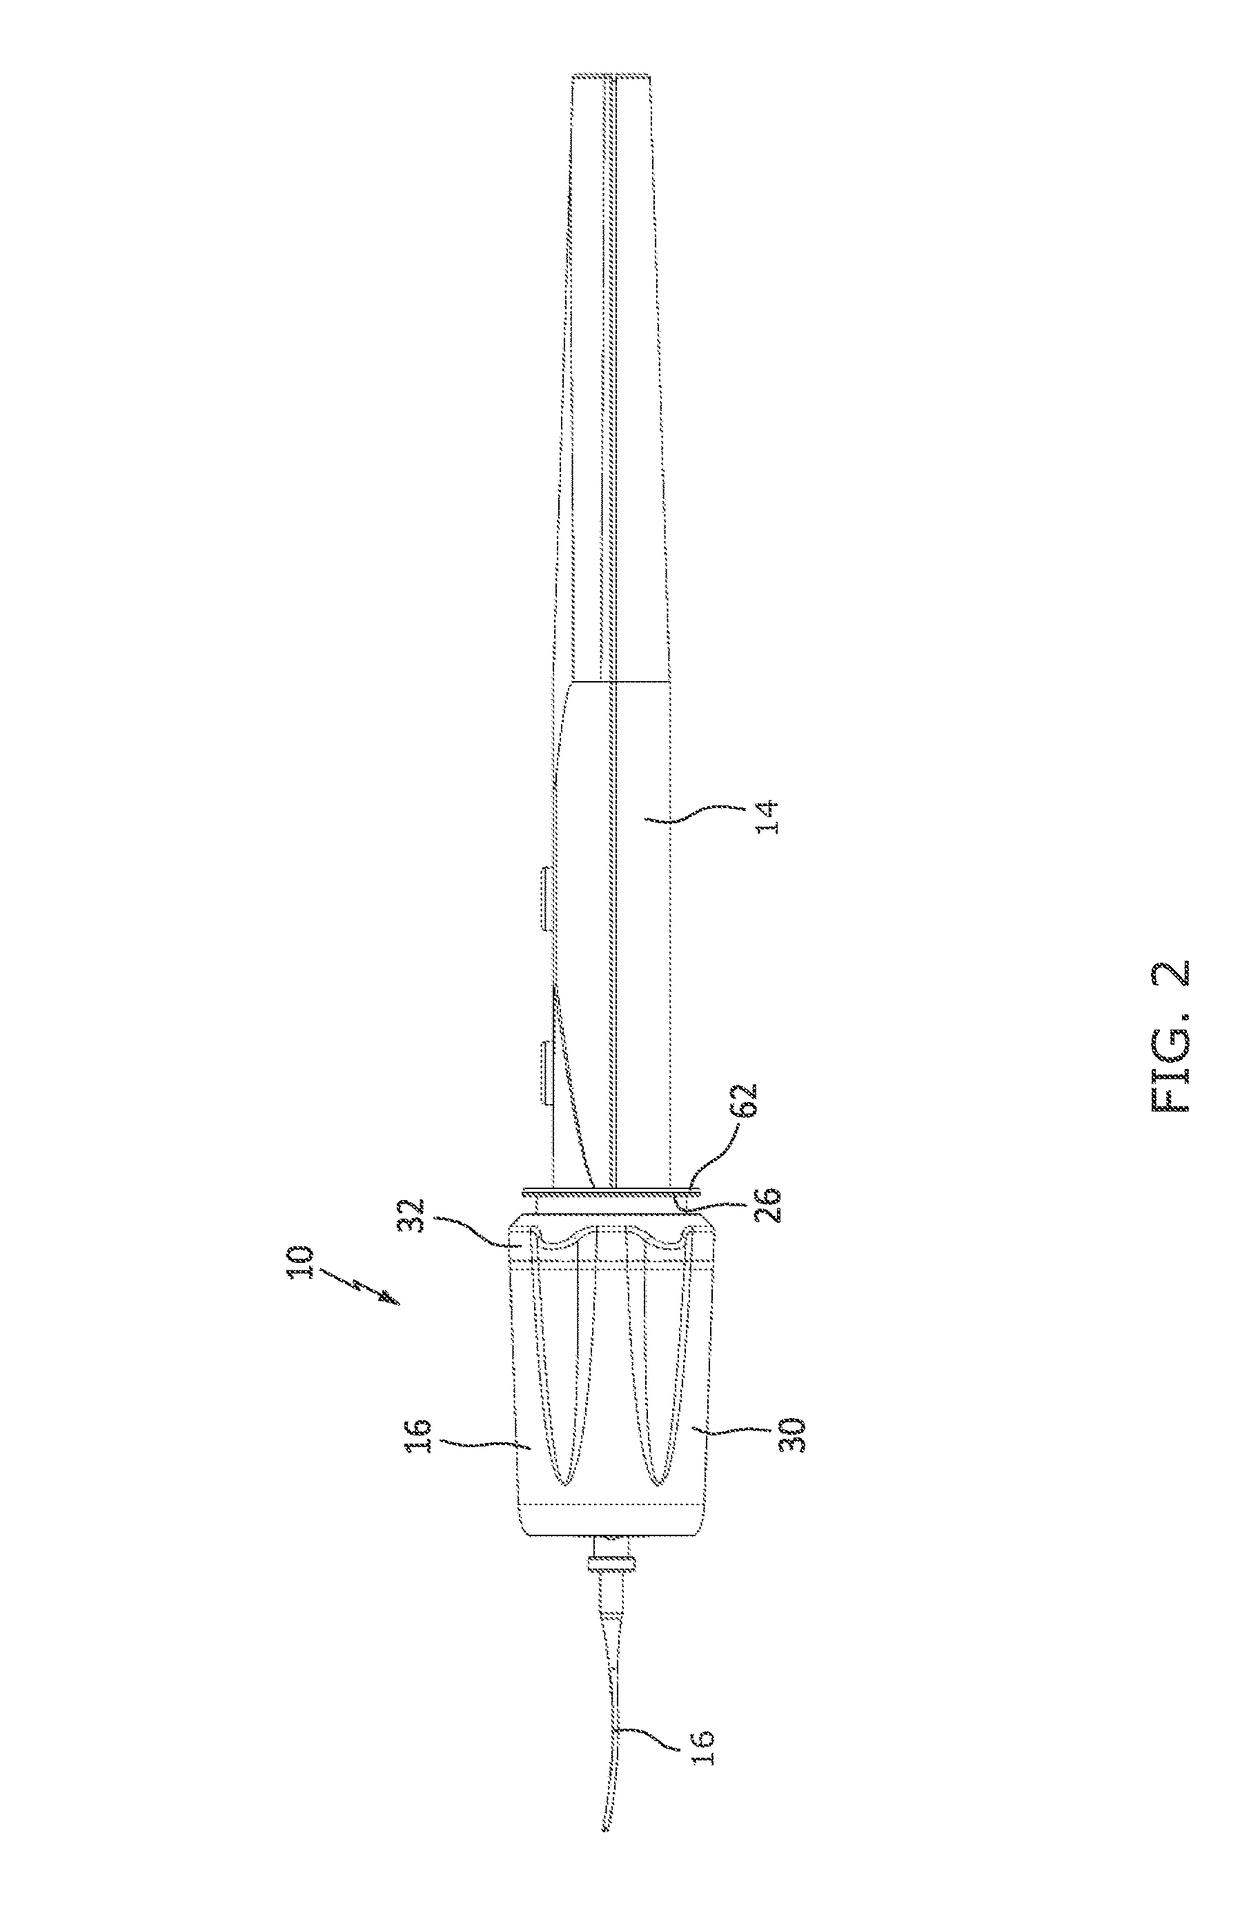 Lighting device for attachment to a tool